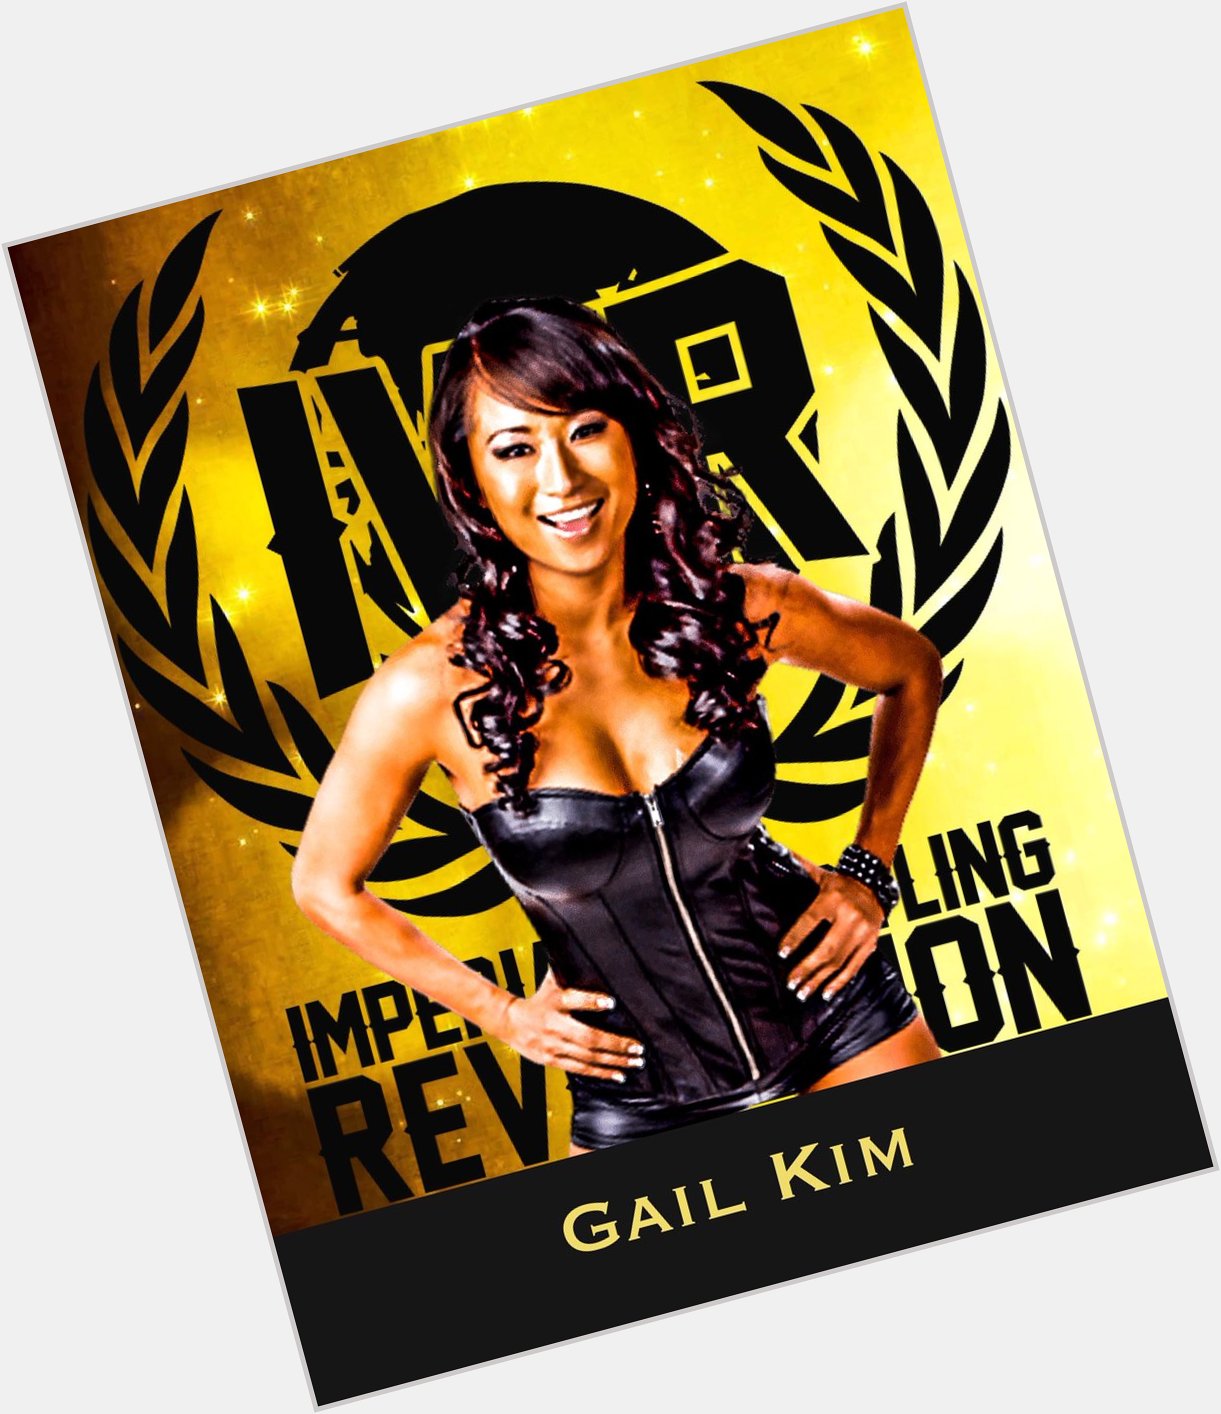 The IWR would like to wish a happy birthday to one of the greatest of all time, the one and only Gail Kim! 